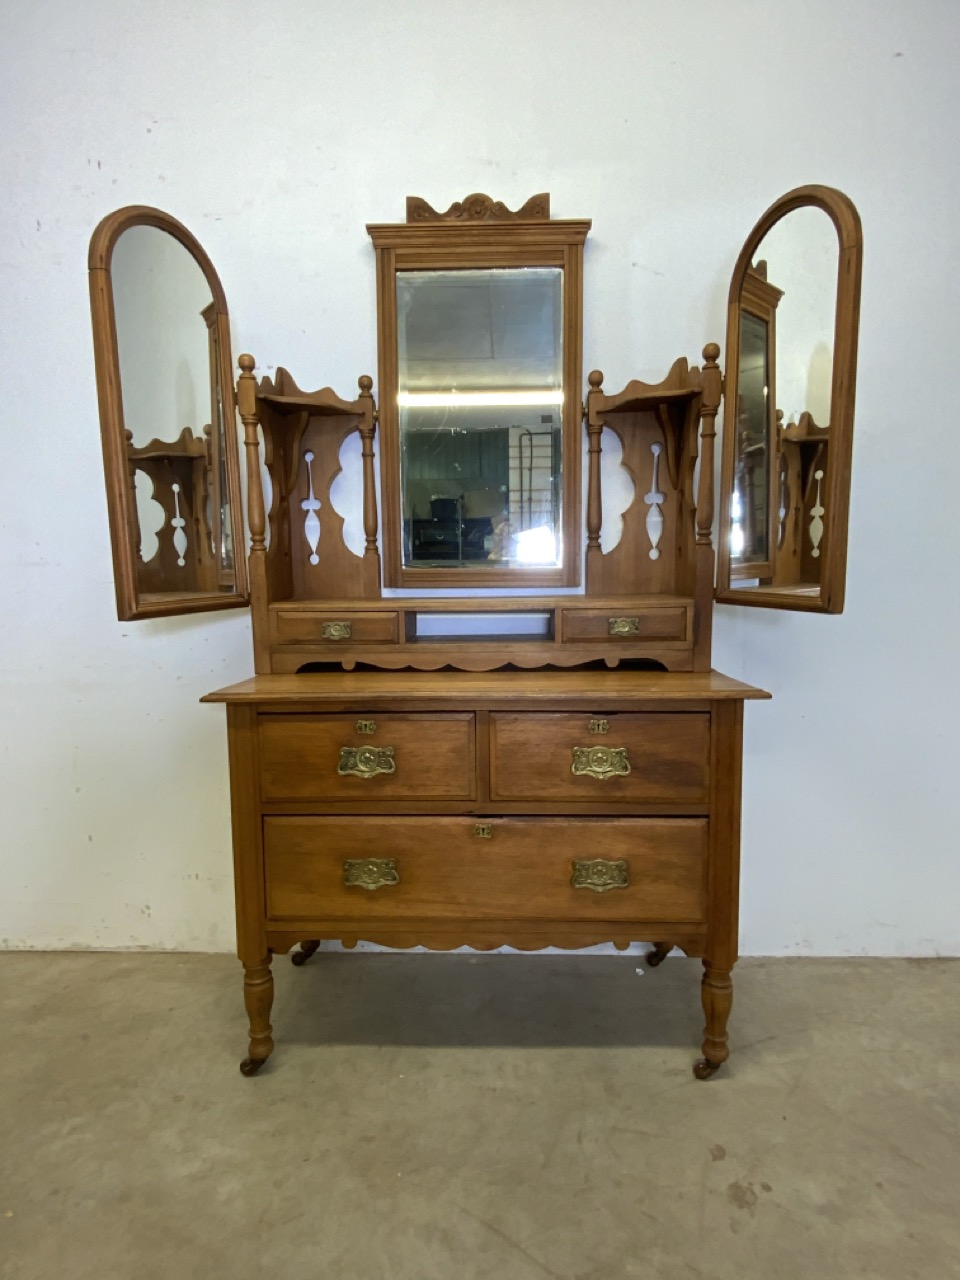 A decorative 20th century dressing chest with three drawers on ceramic castors. Triple mirrored